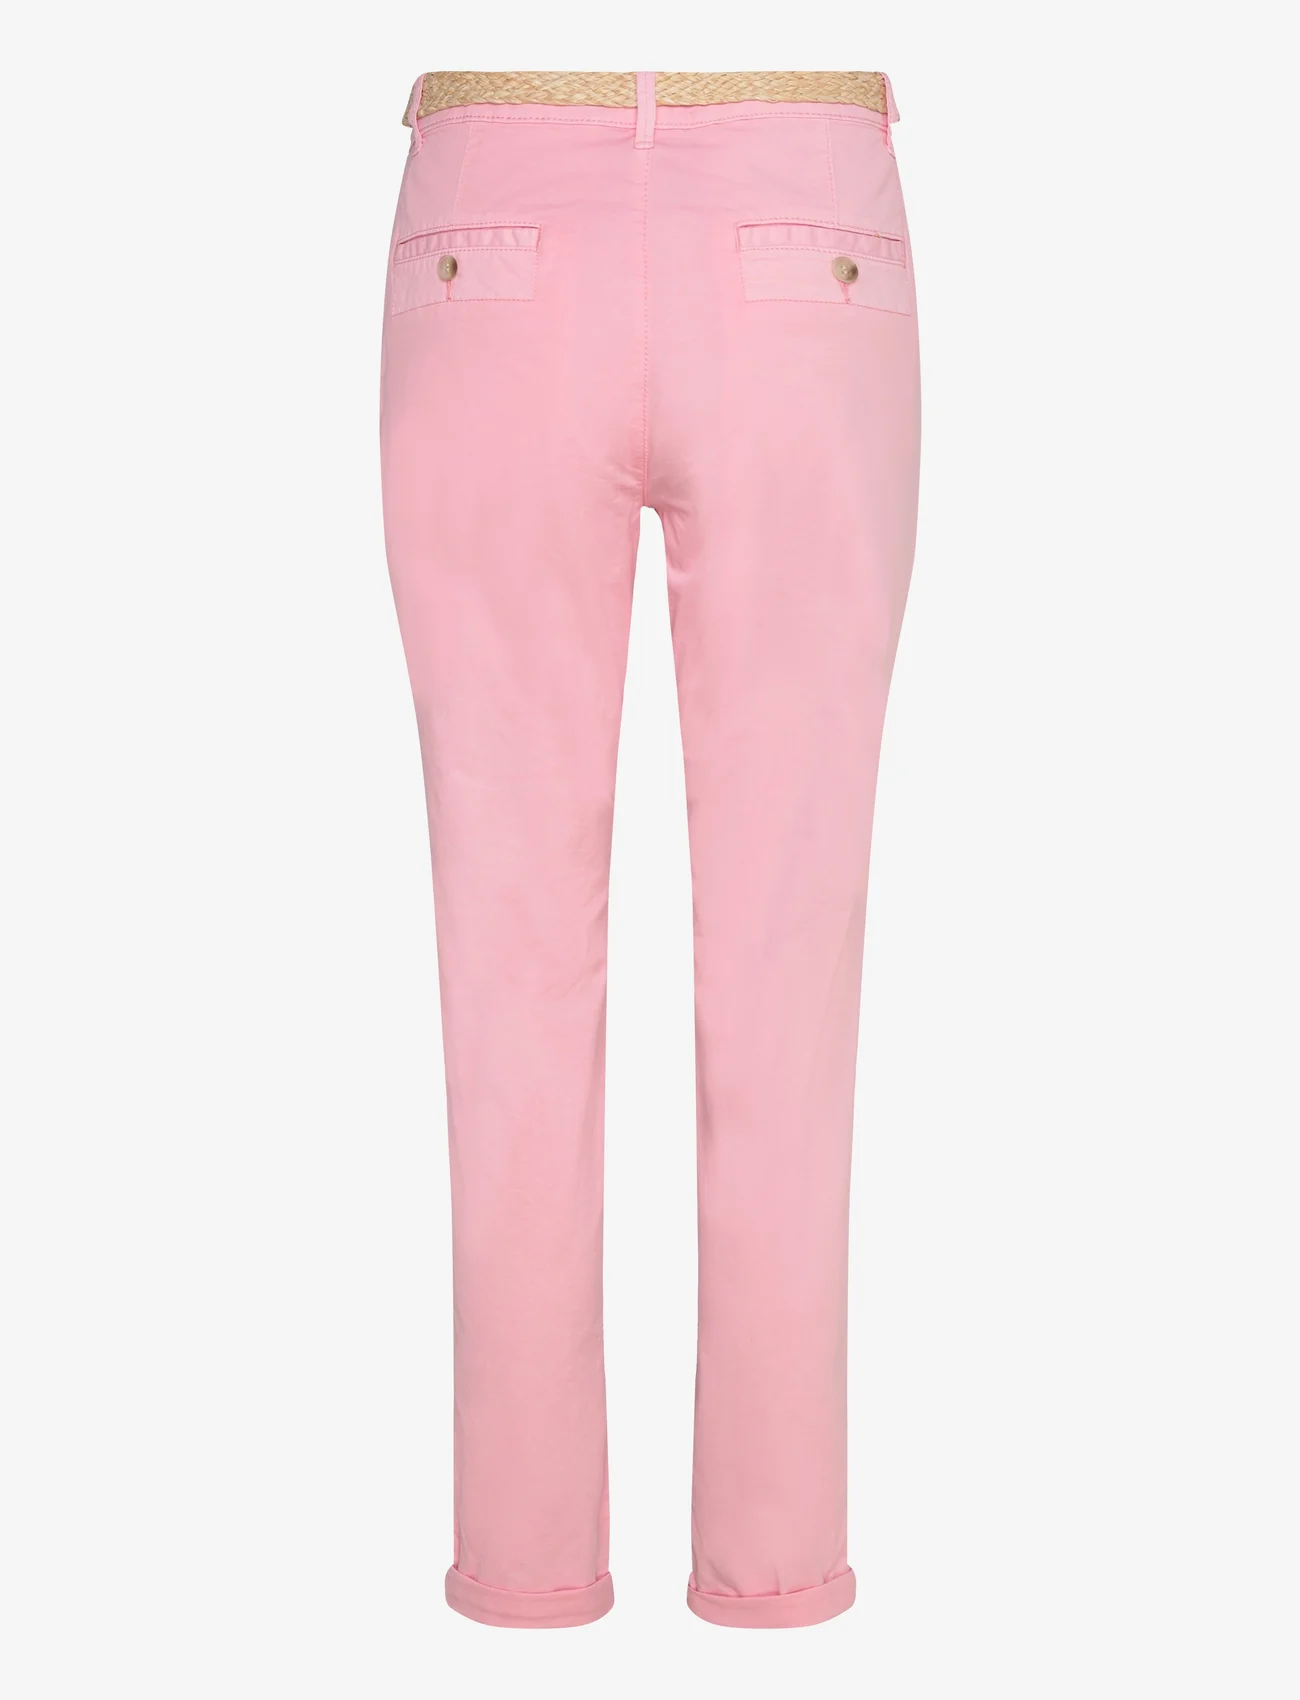 Esprit Casual - Cropped chinos - chino's - pastel pink - 1